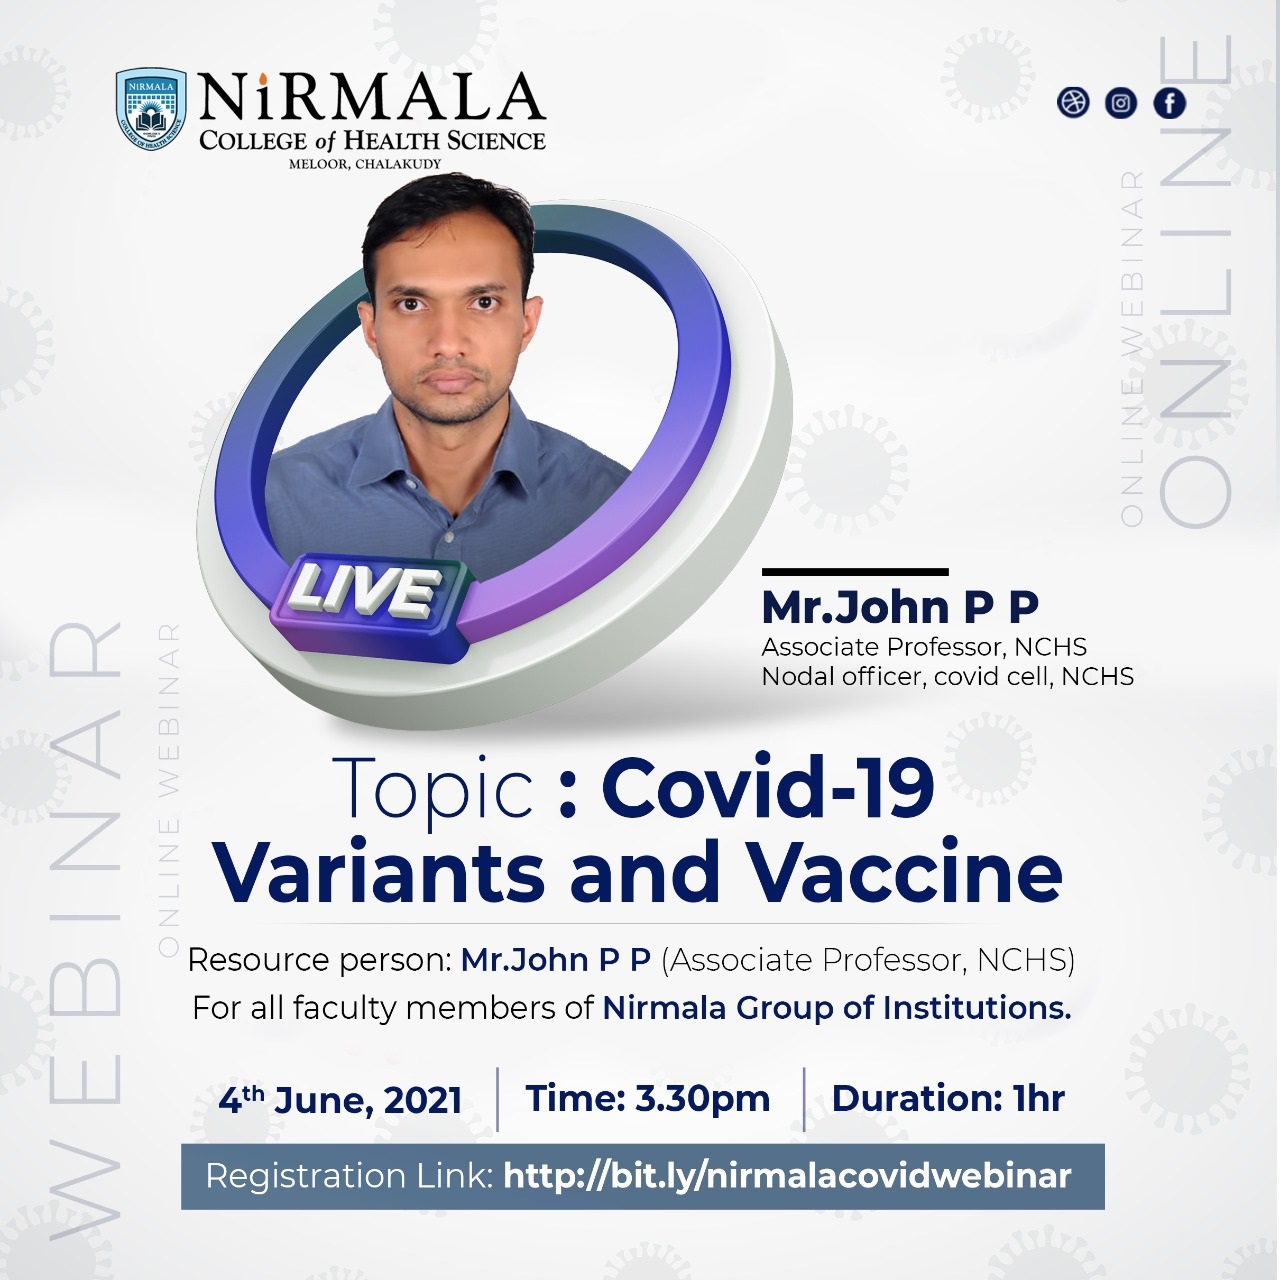 Webinar on topic of Covid-19 Variants and Vaccine